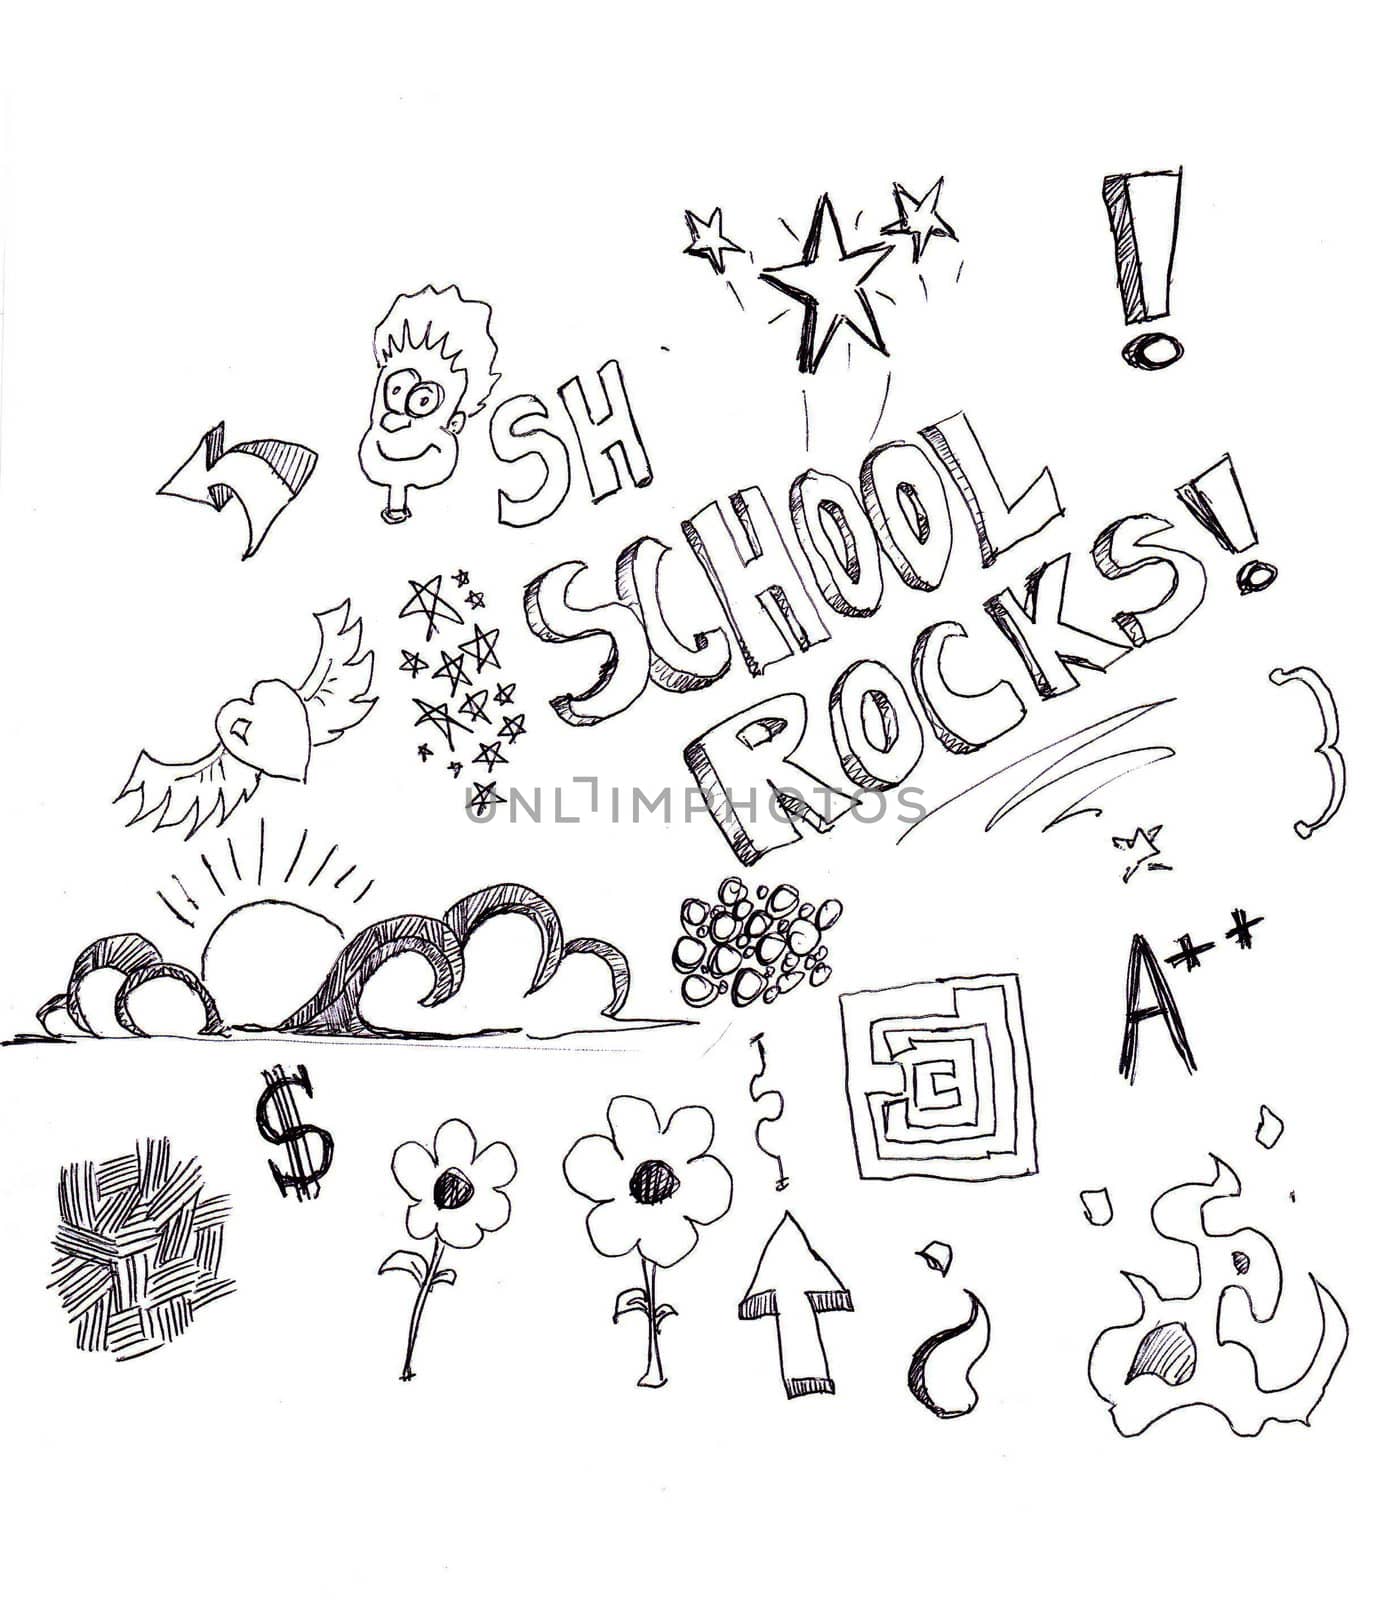 hand-drawn doodles with a school theme of arrows, clouds, letters, flowers, and other doodles 